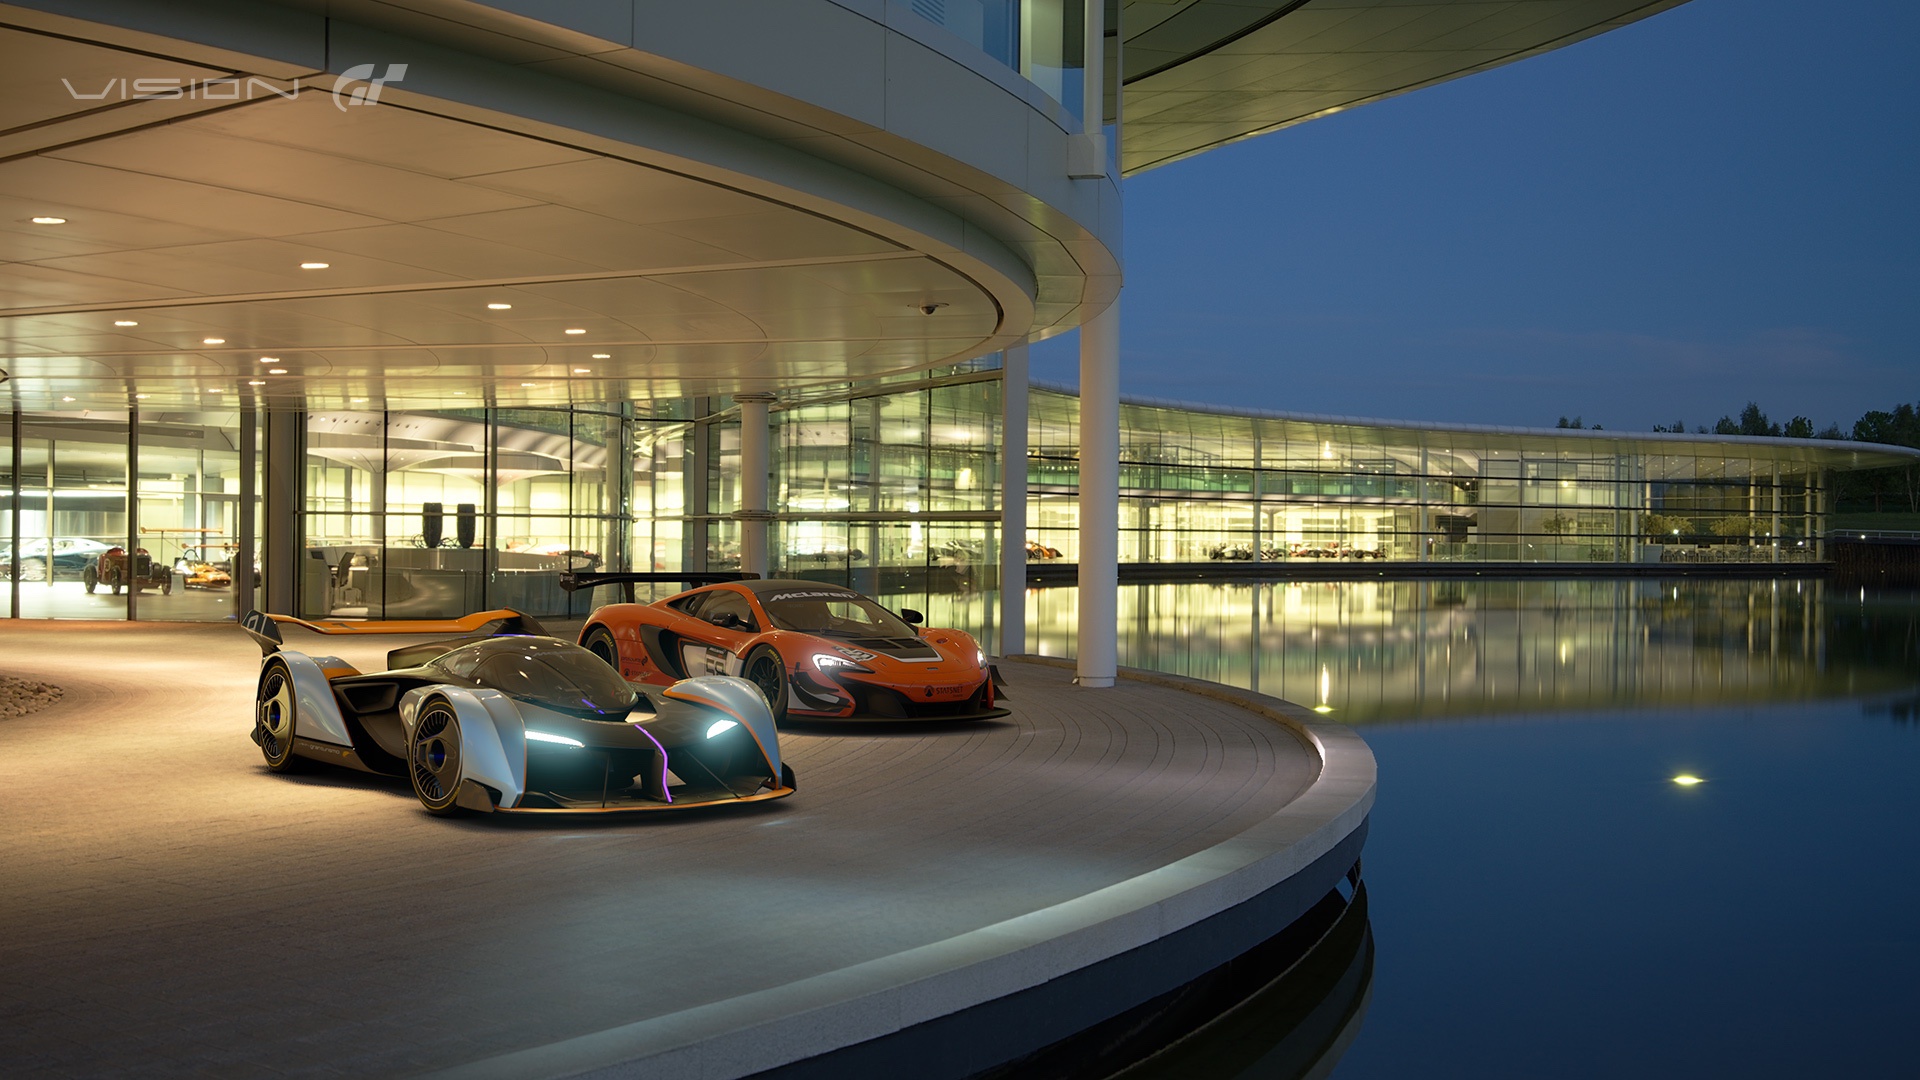 McLaren Ultimate Vision GT that informed some aspects of the real world McLaren Senna